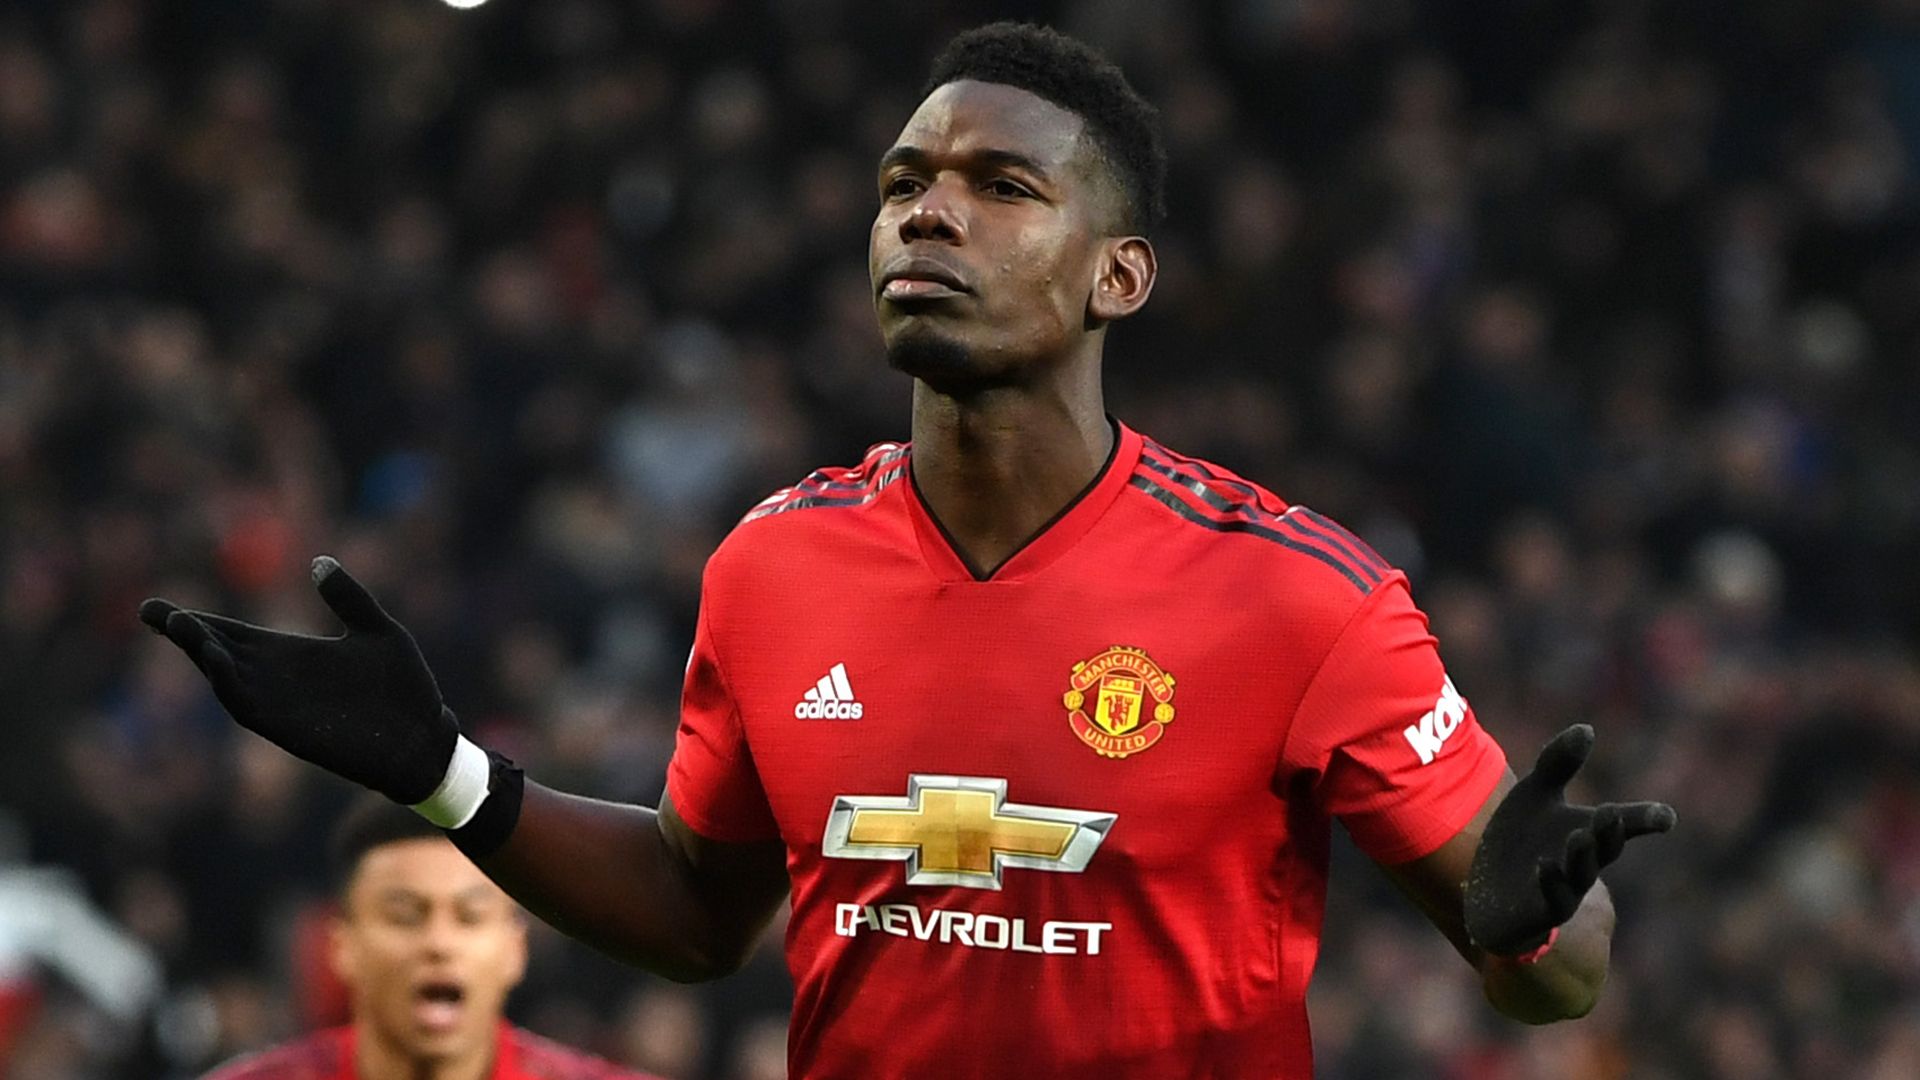 Man Utd transfer news: Wayne Rooney hoping to see Paul Pogba follow his lead and become 'great' addition to MLS